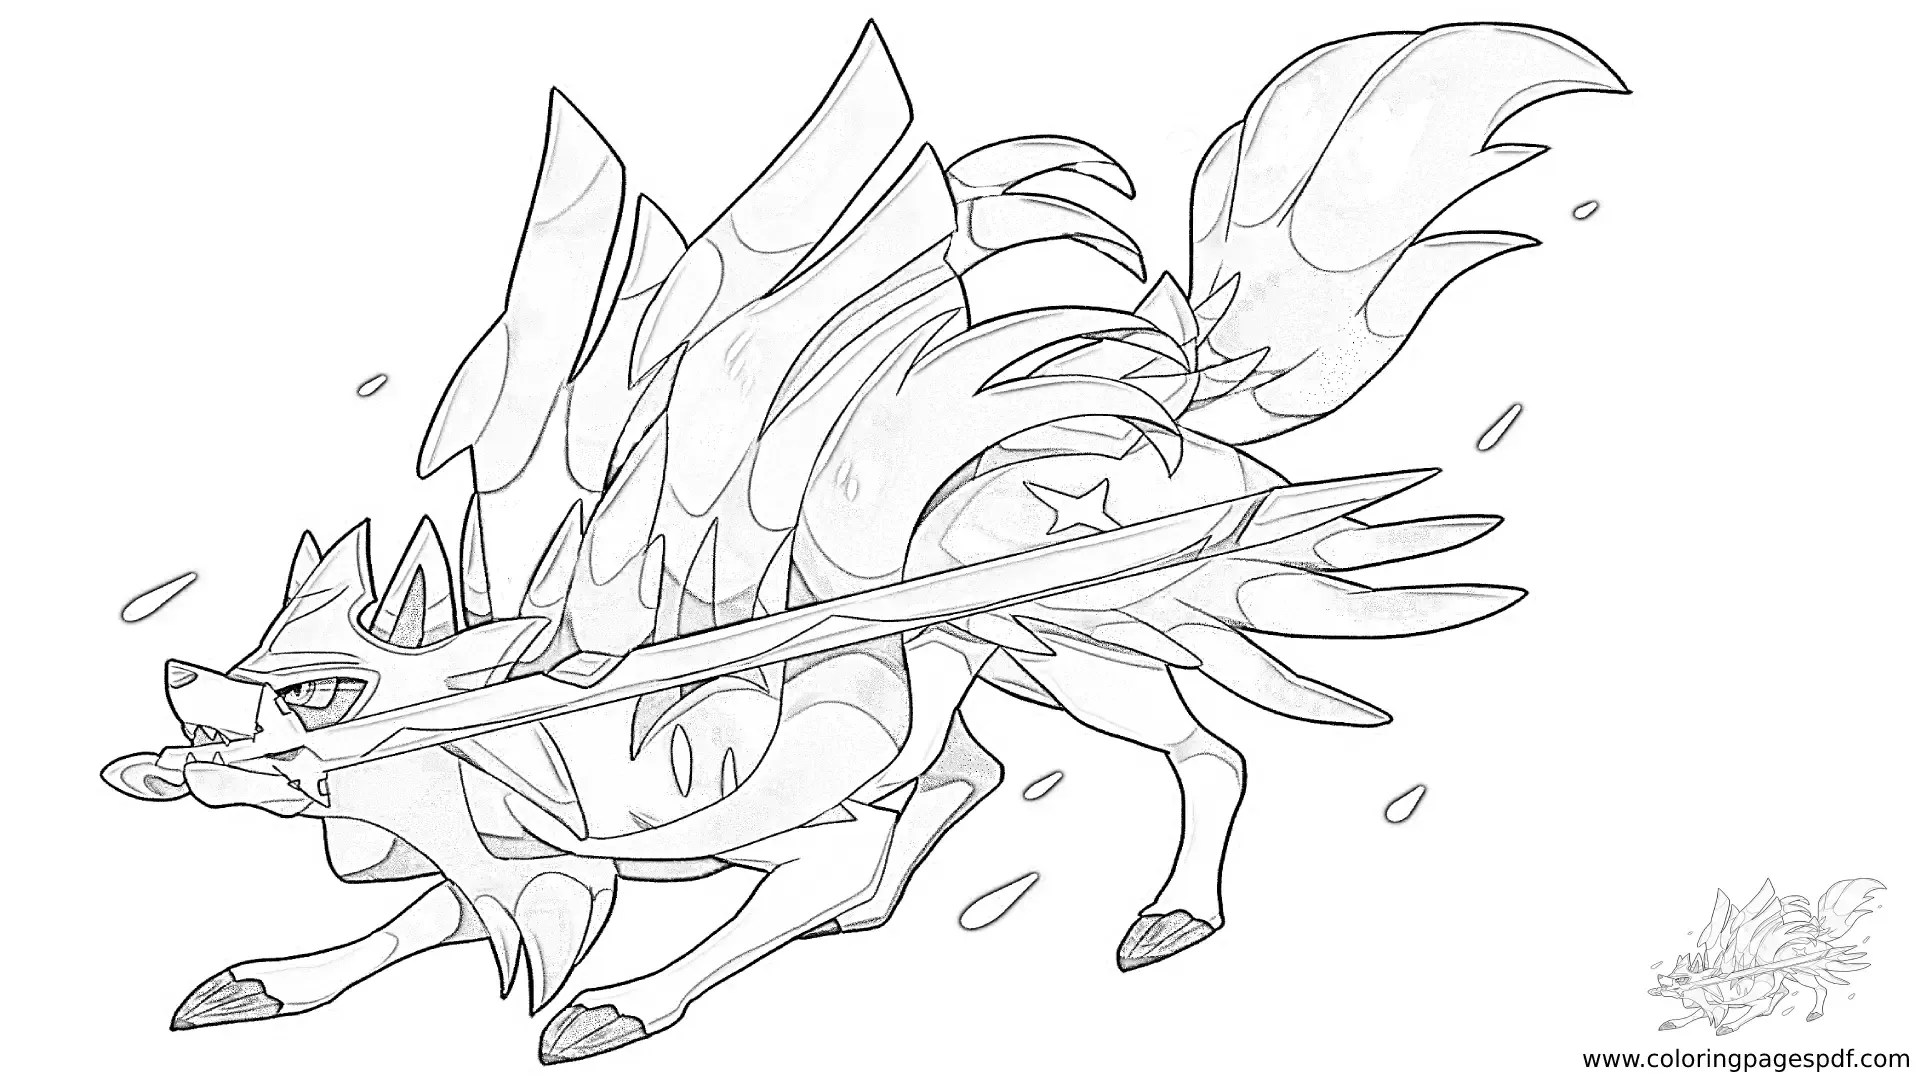 Coloring Page Of Crowned Sword Zacian Looking Up